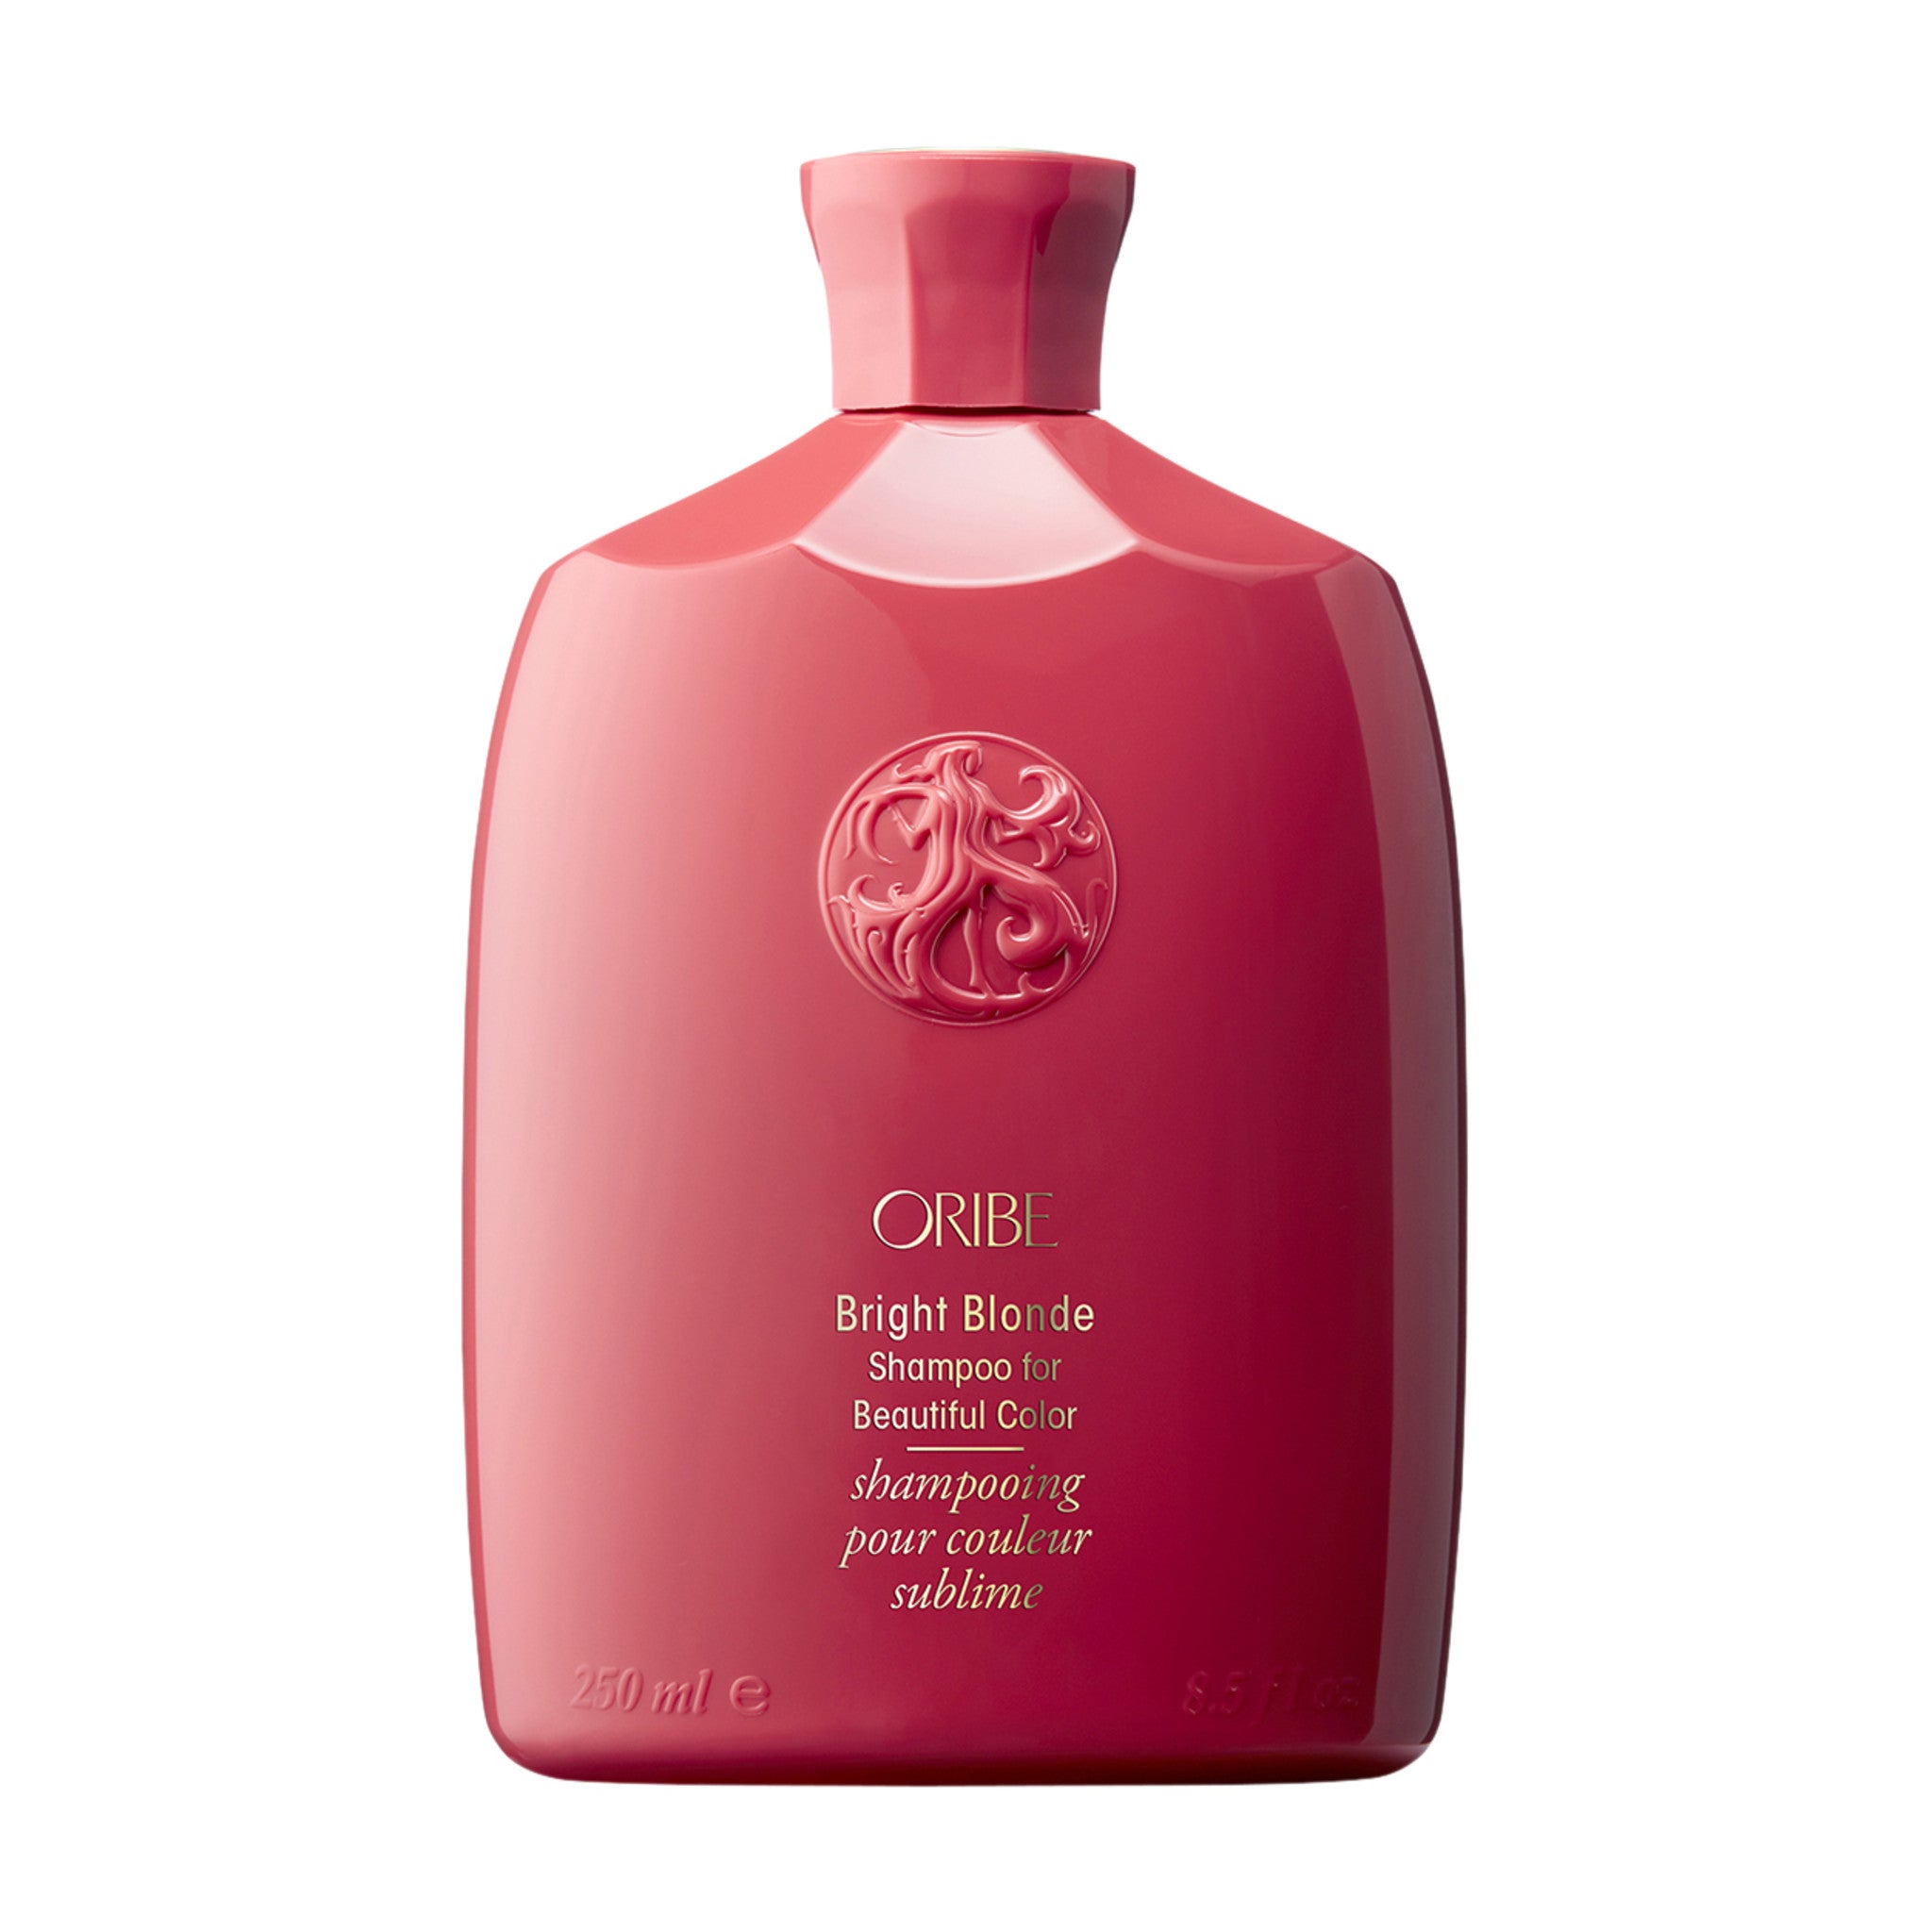 Oribe Bright Blonde For Beautiful Color Shampoo Size variant: 8.5 oz | 250 ml main image. This product is for blonde hair